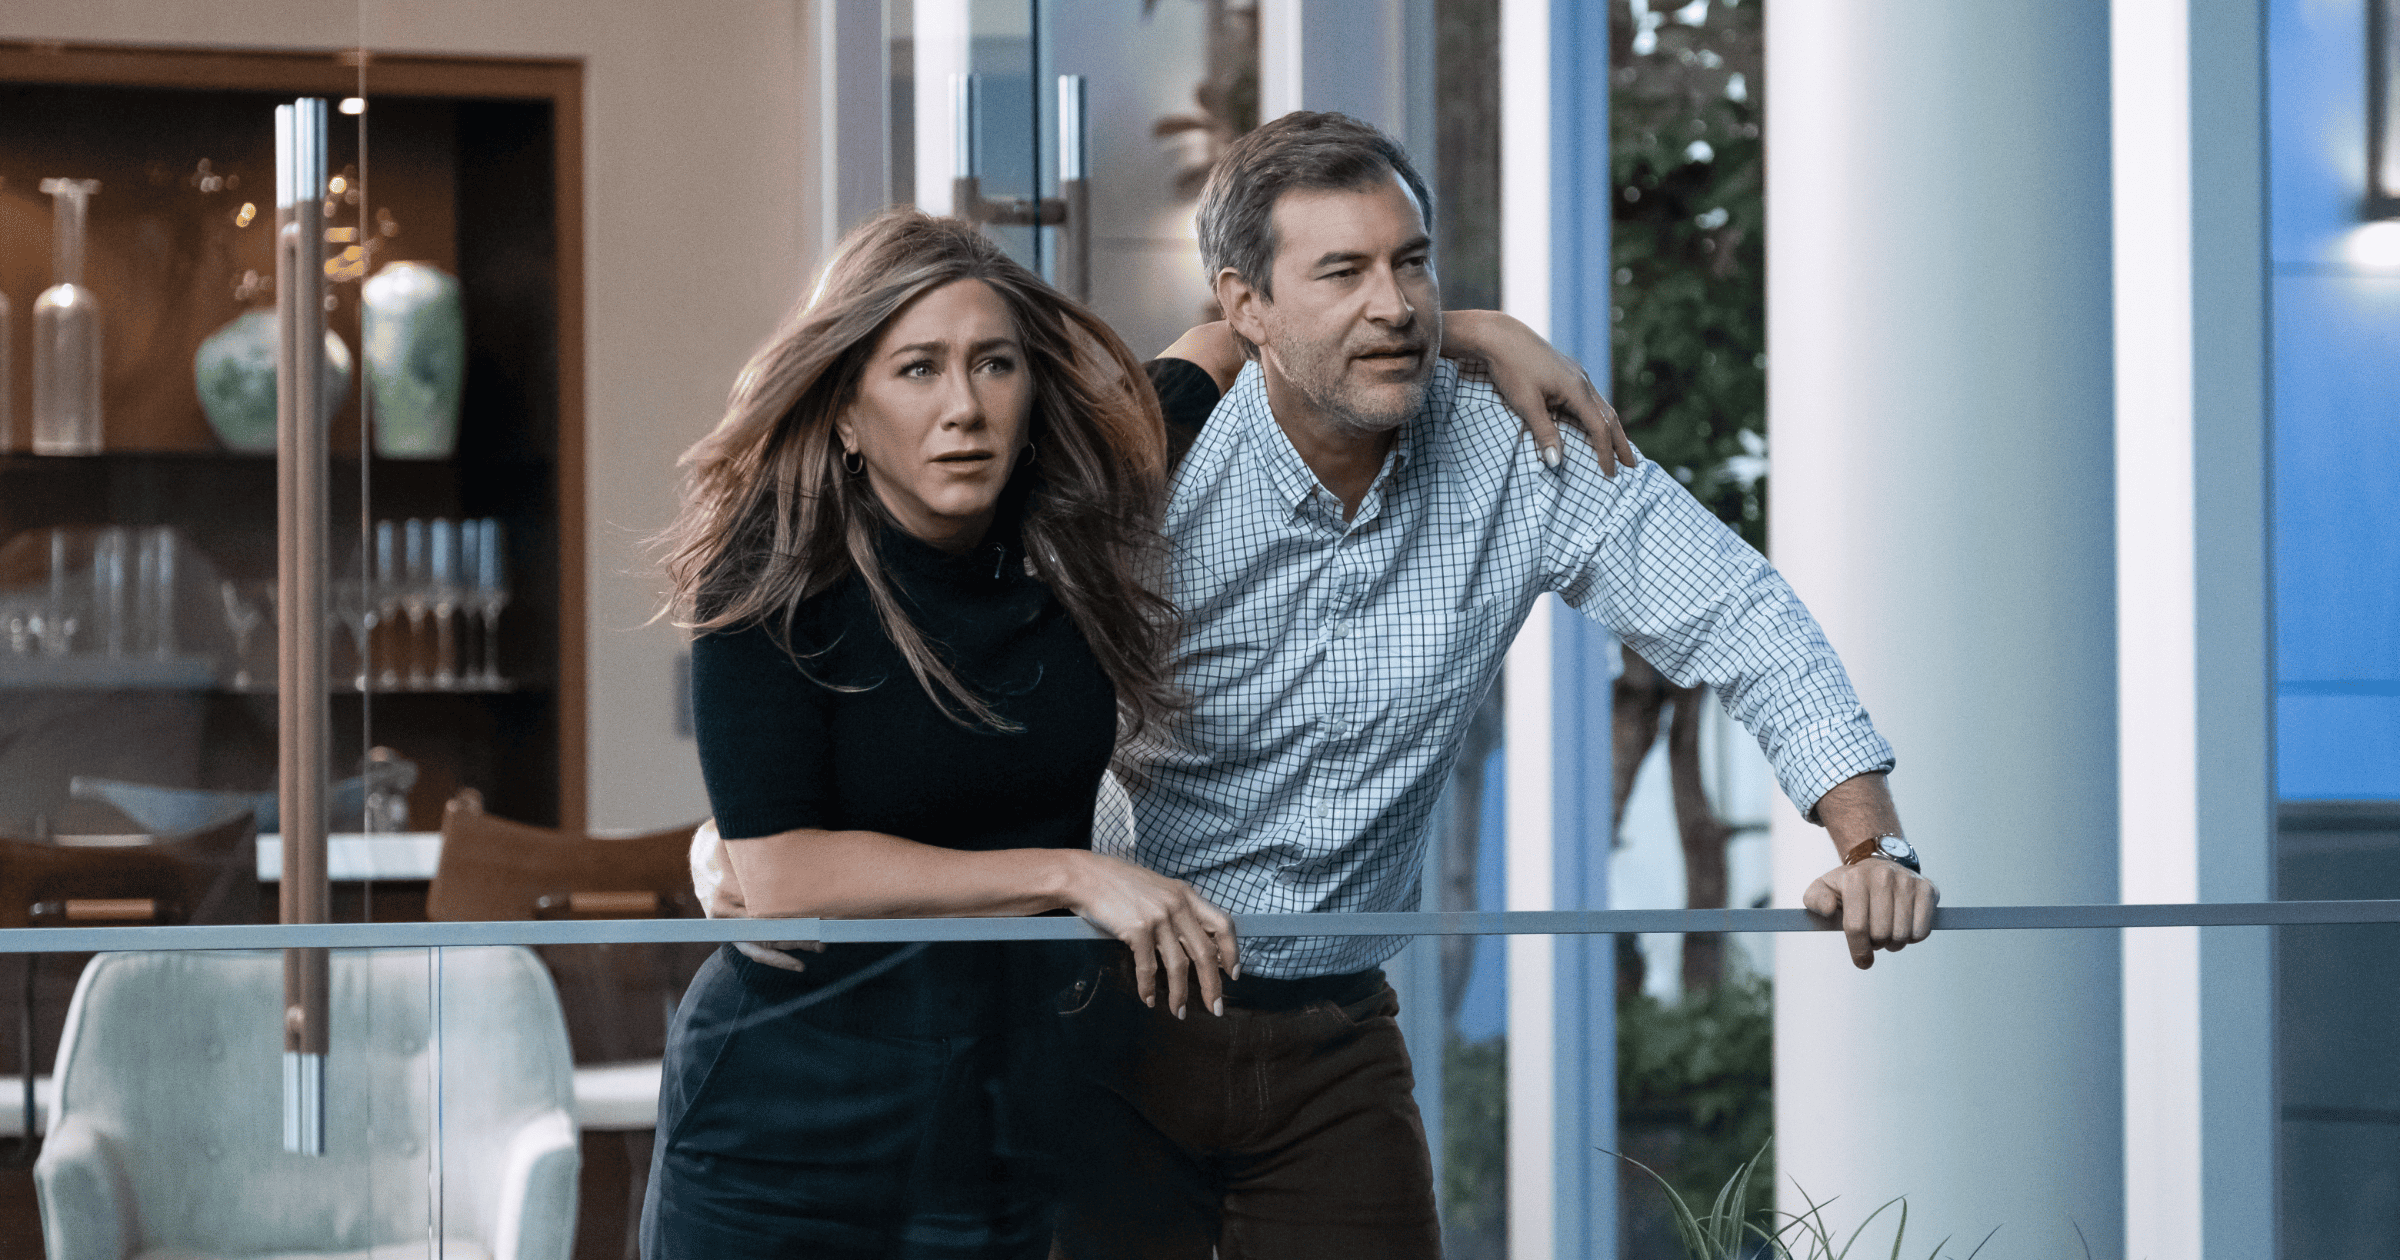 ‘The Morning Show’ – An Alex Levy GIF For Every Mood